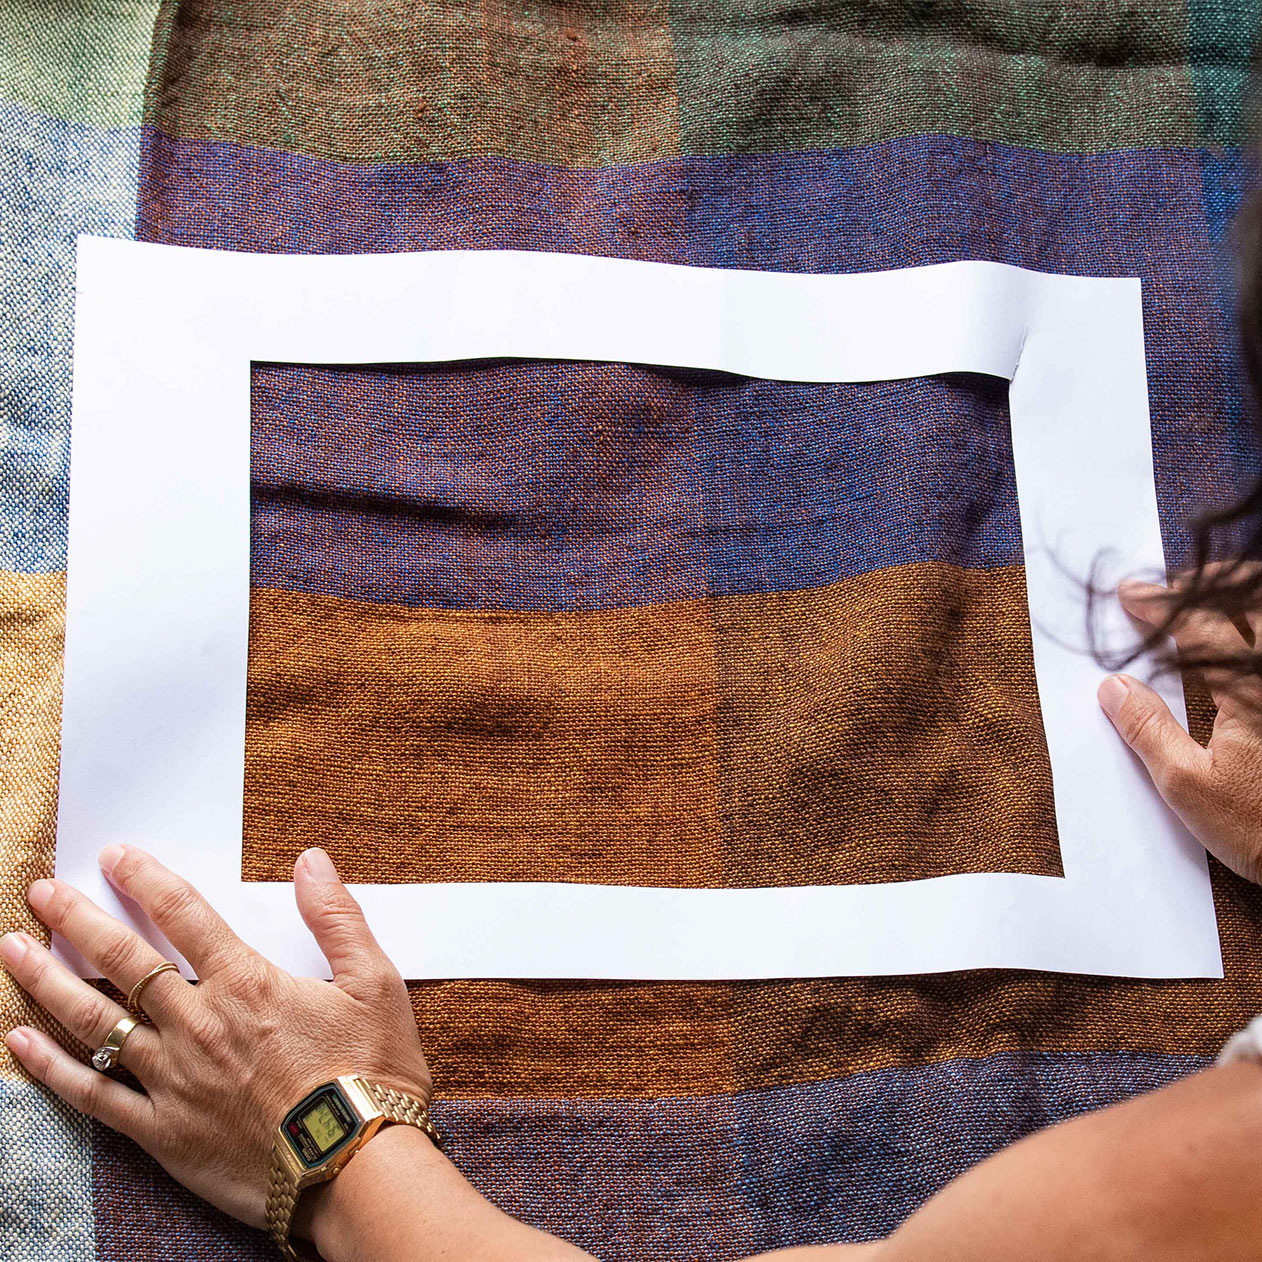 Behind the design: the inspiration behind our Rothko cushion & throw